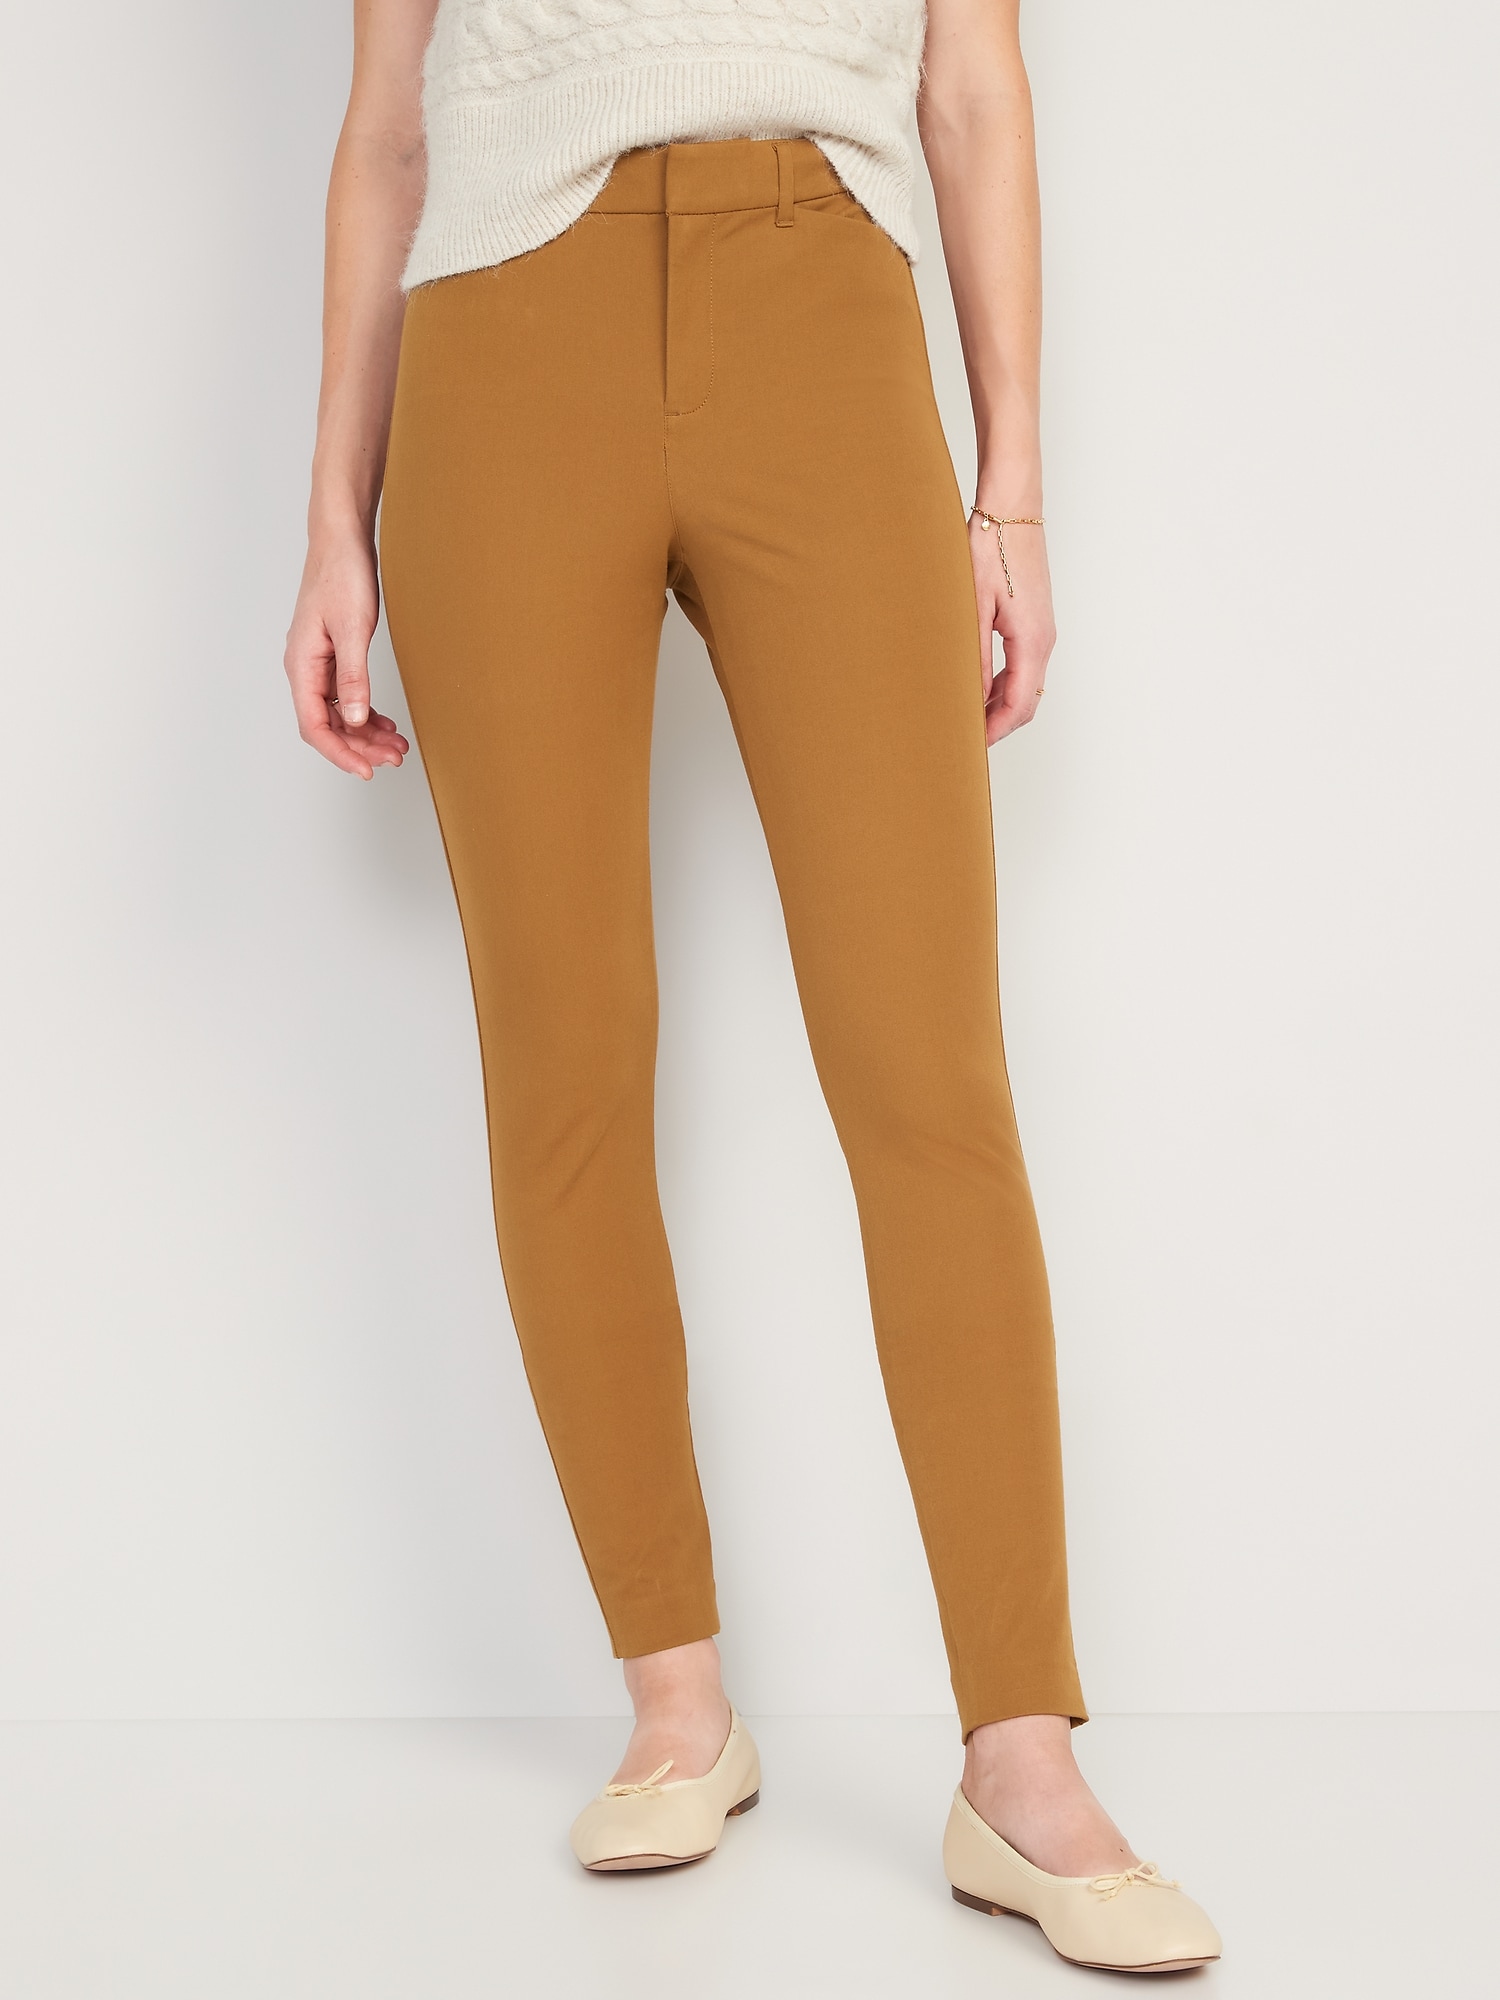 Old Navy The Pixie Ankle Pants, $34, Old Navy